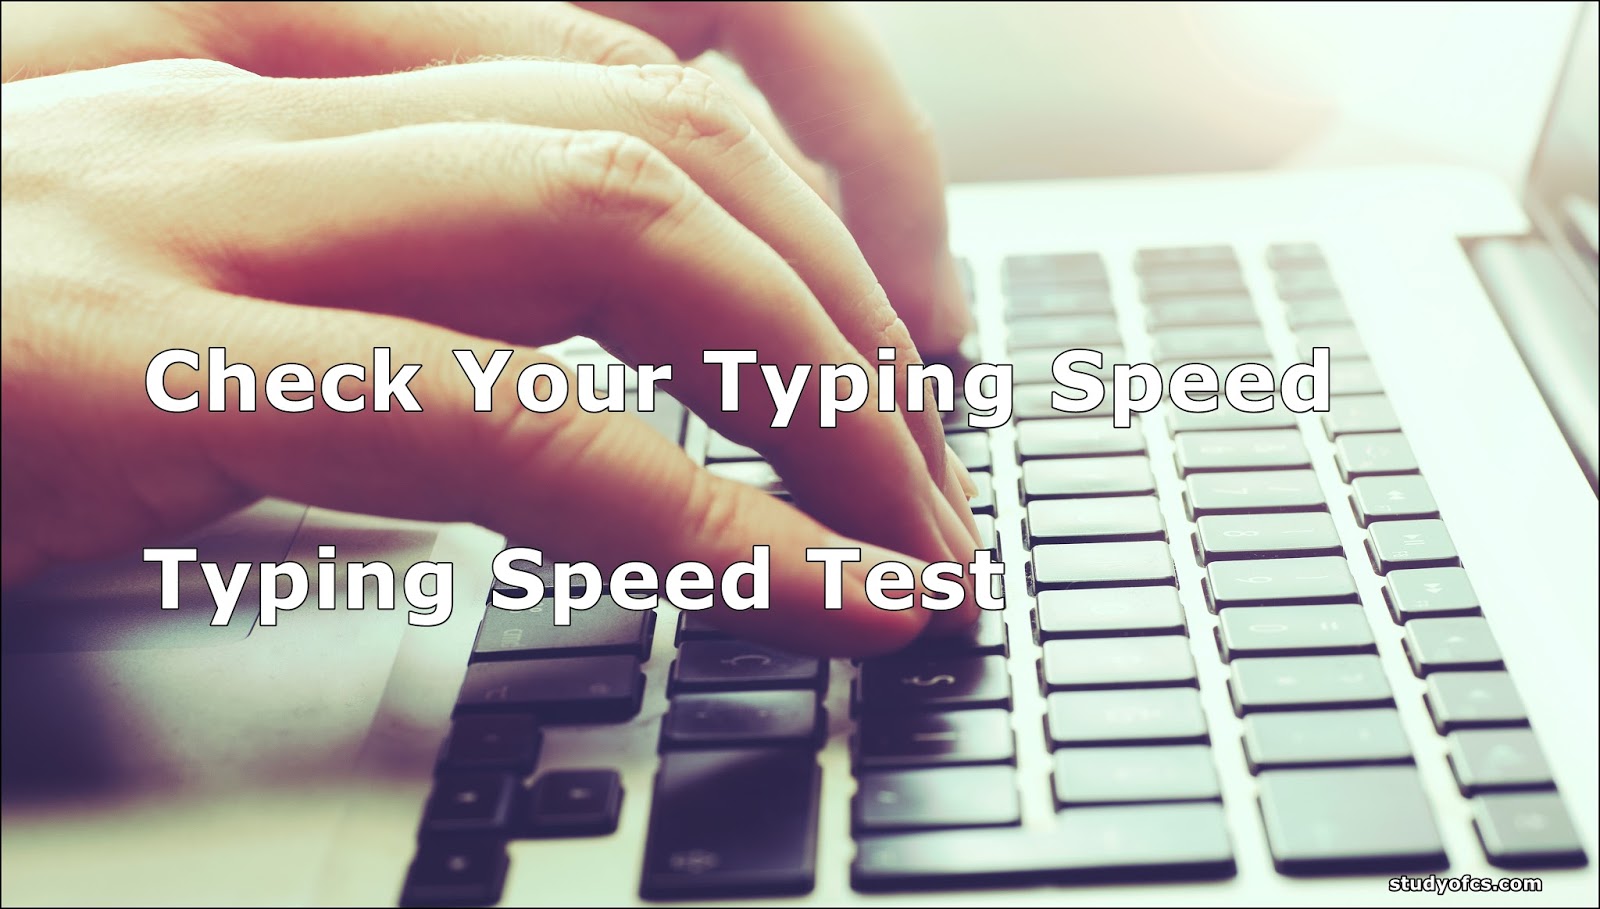 Typing 10 fast fingers own words, Typing test last 10 fingers, Typing practice, 10 fast fingers hack, Typing test british, Advanced 10 fast fingers, Advanced typing test, Build your own typing test,